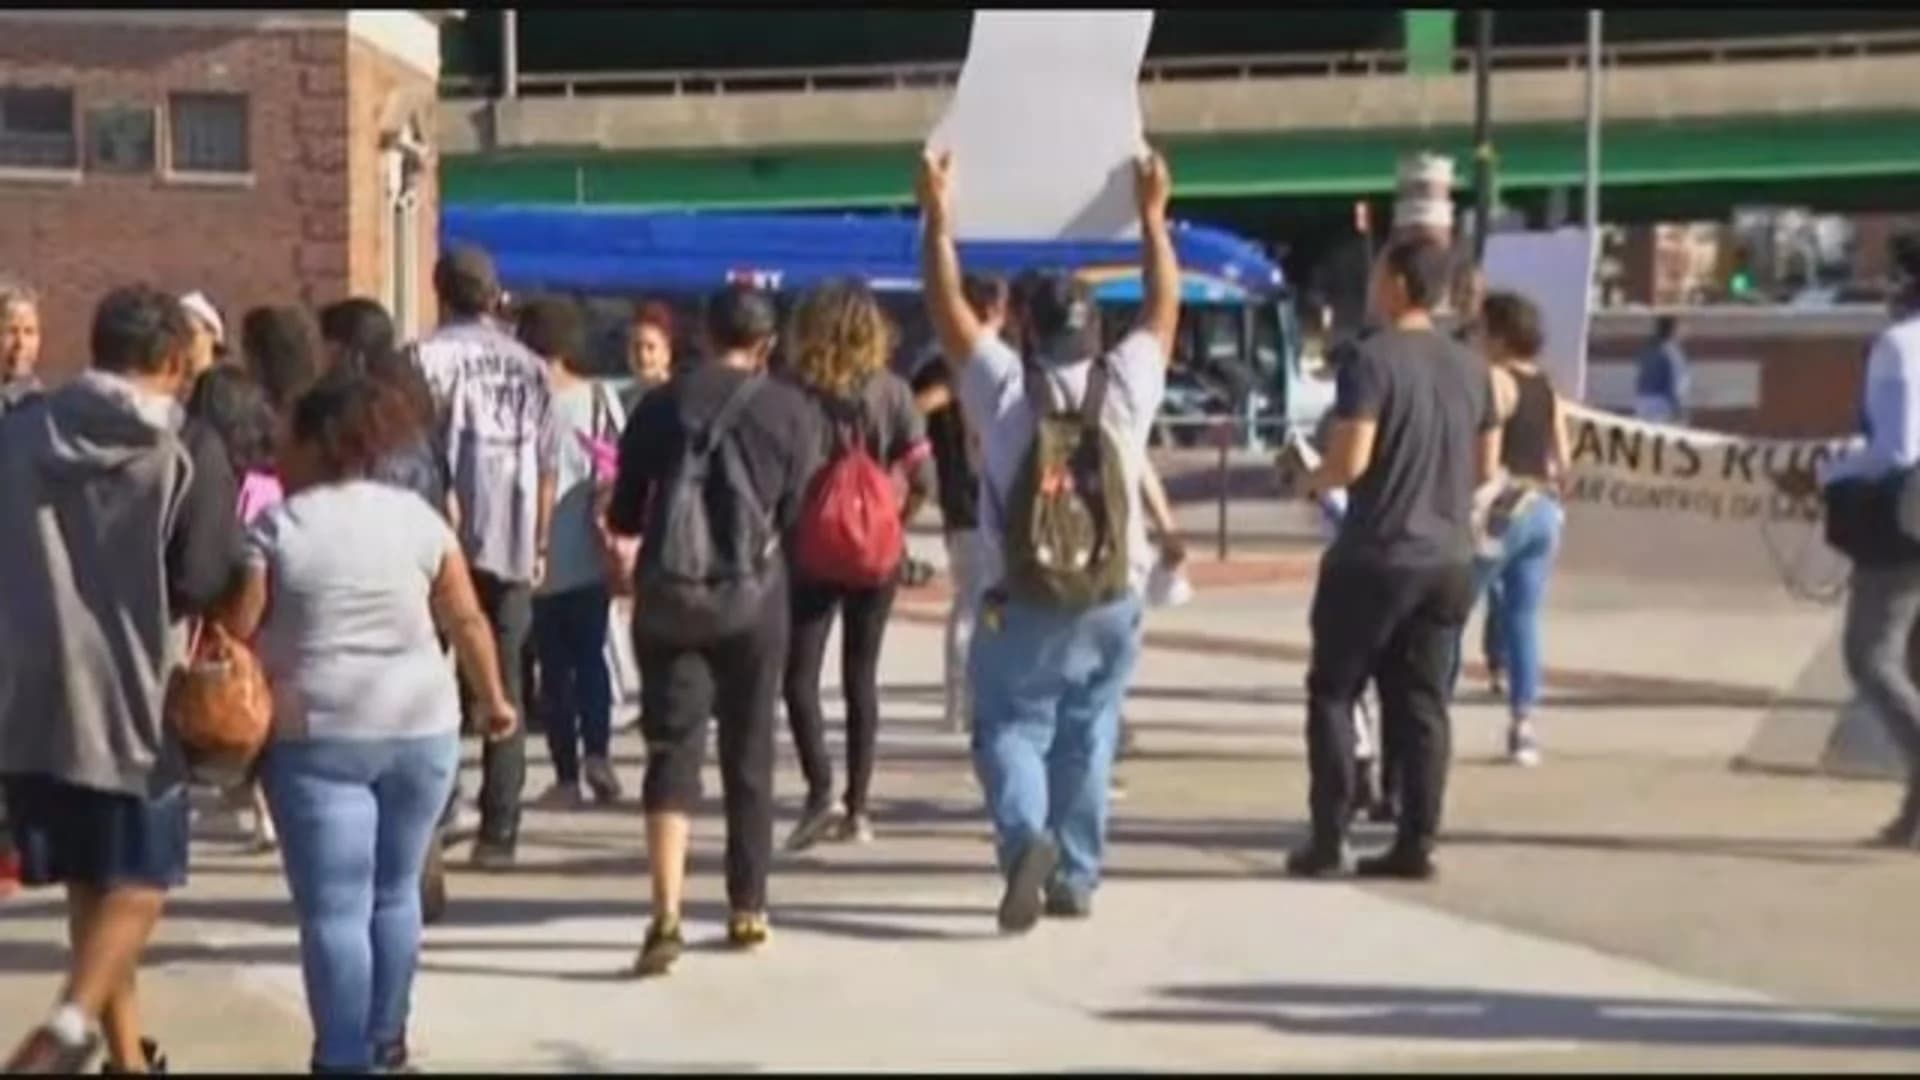 Grassroots groups march against gentrification